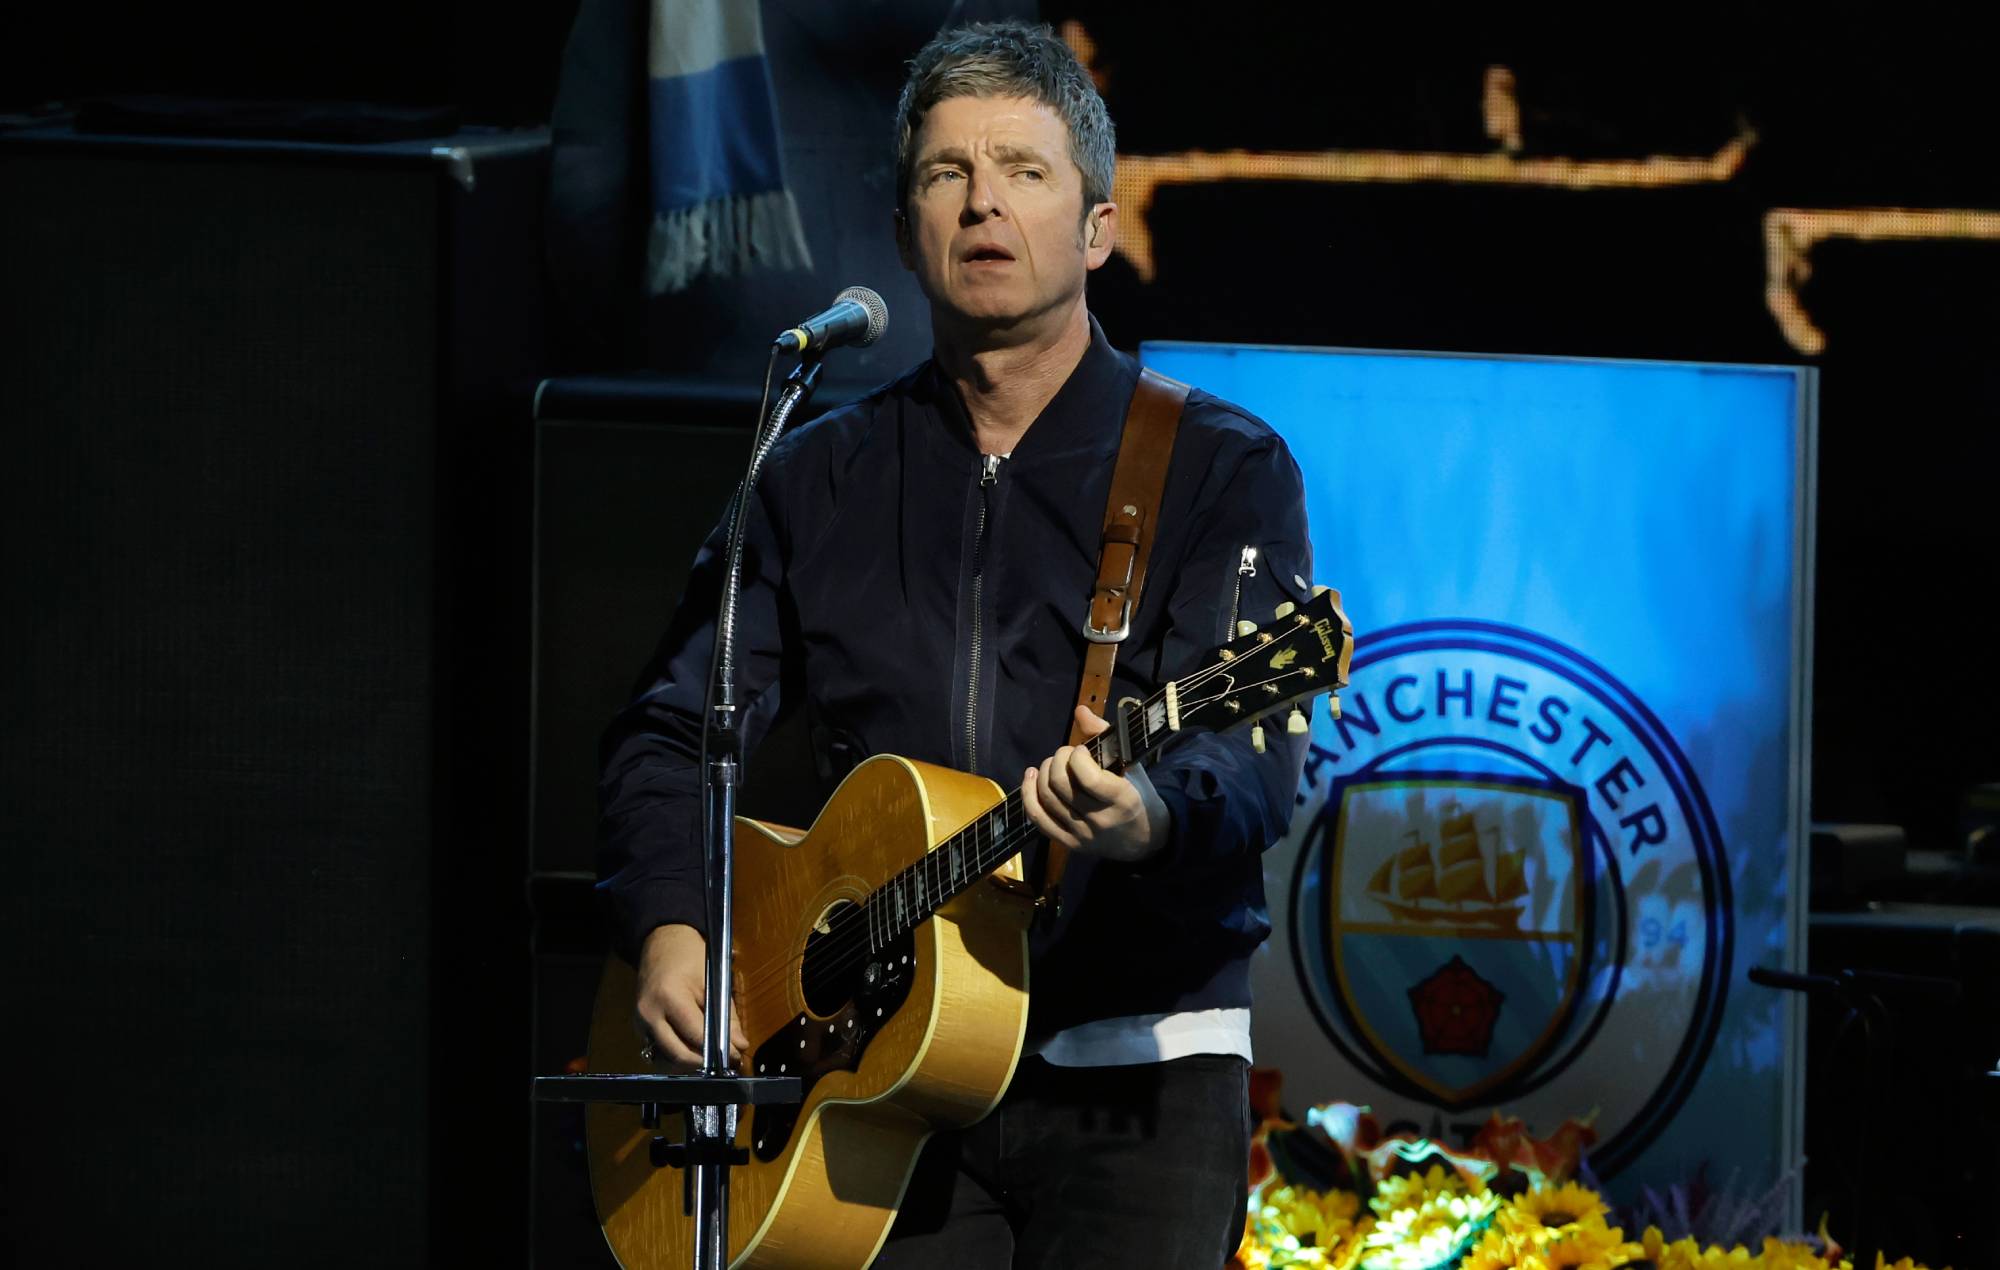 Noel Gallagher’s New York gig cancelled due to bomb threat